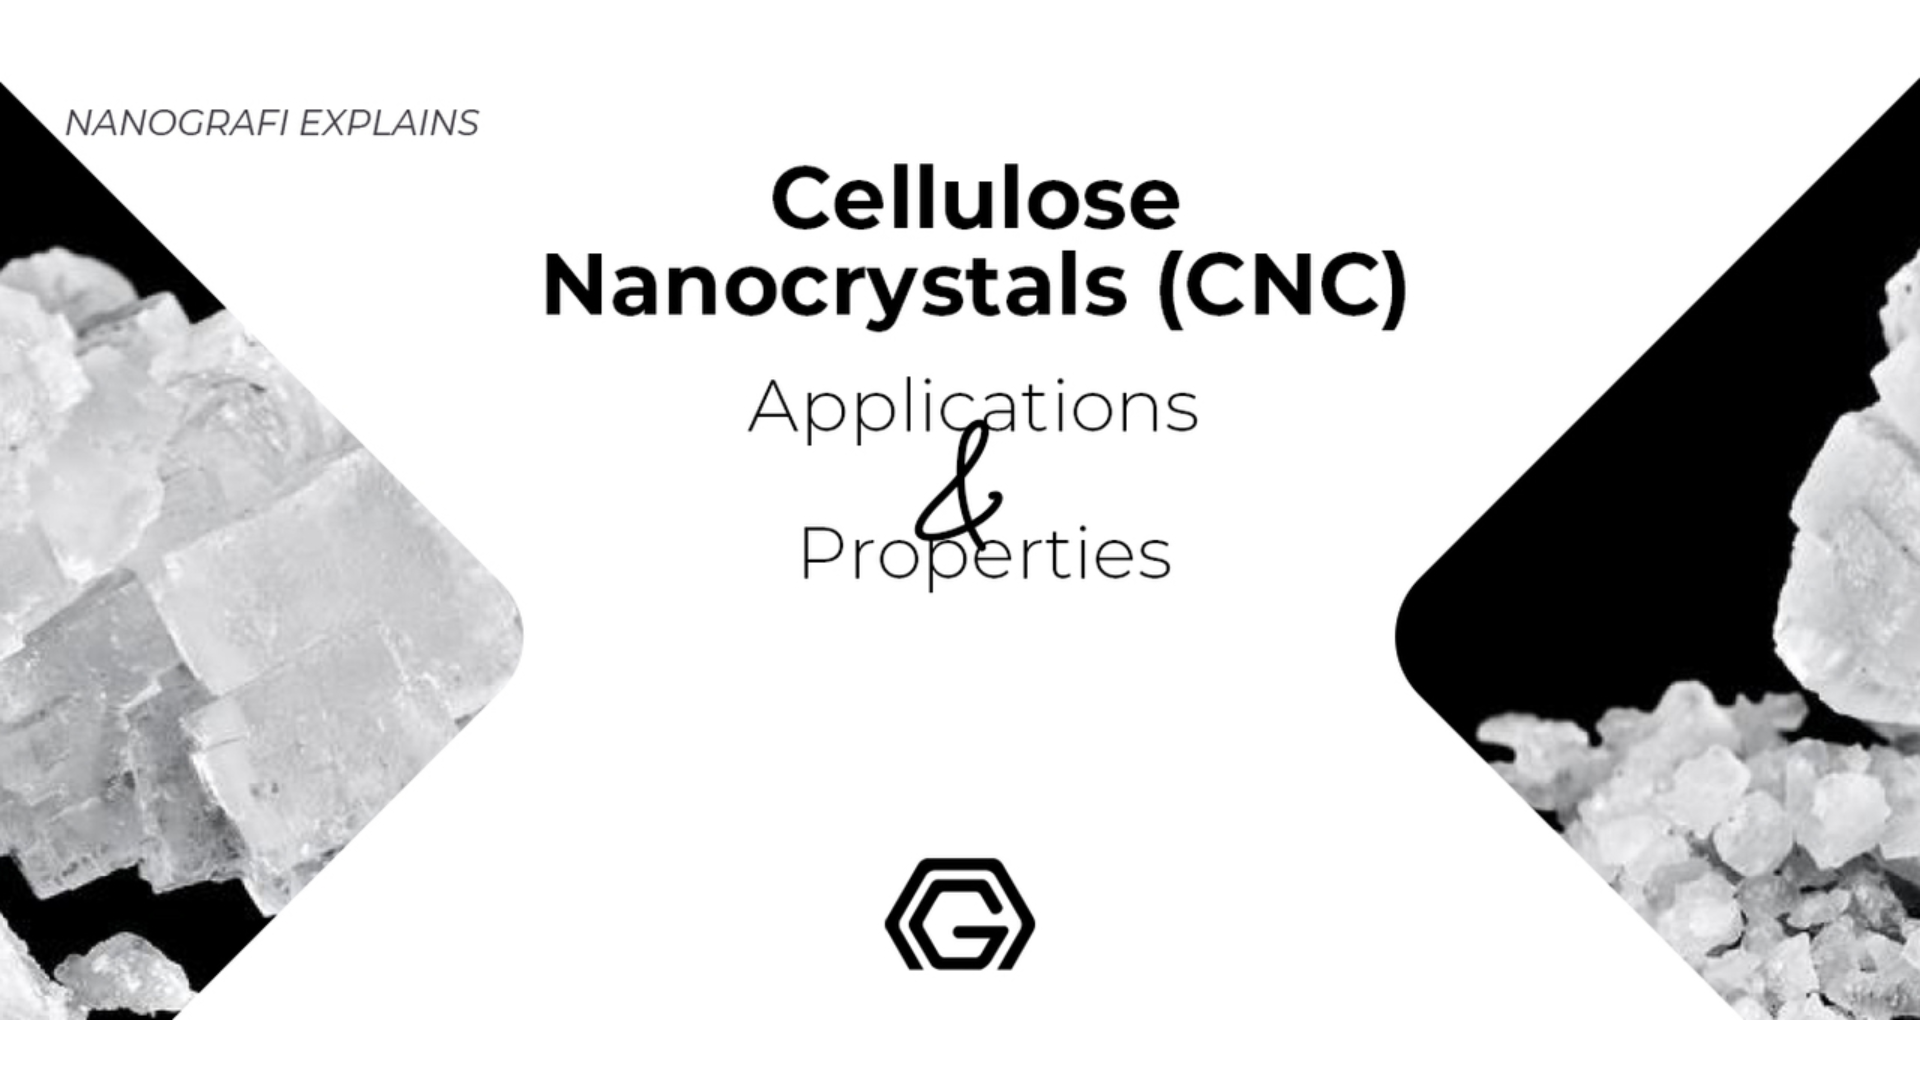 Cellulose nancrystals (CNC) applications and properties